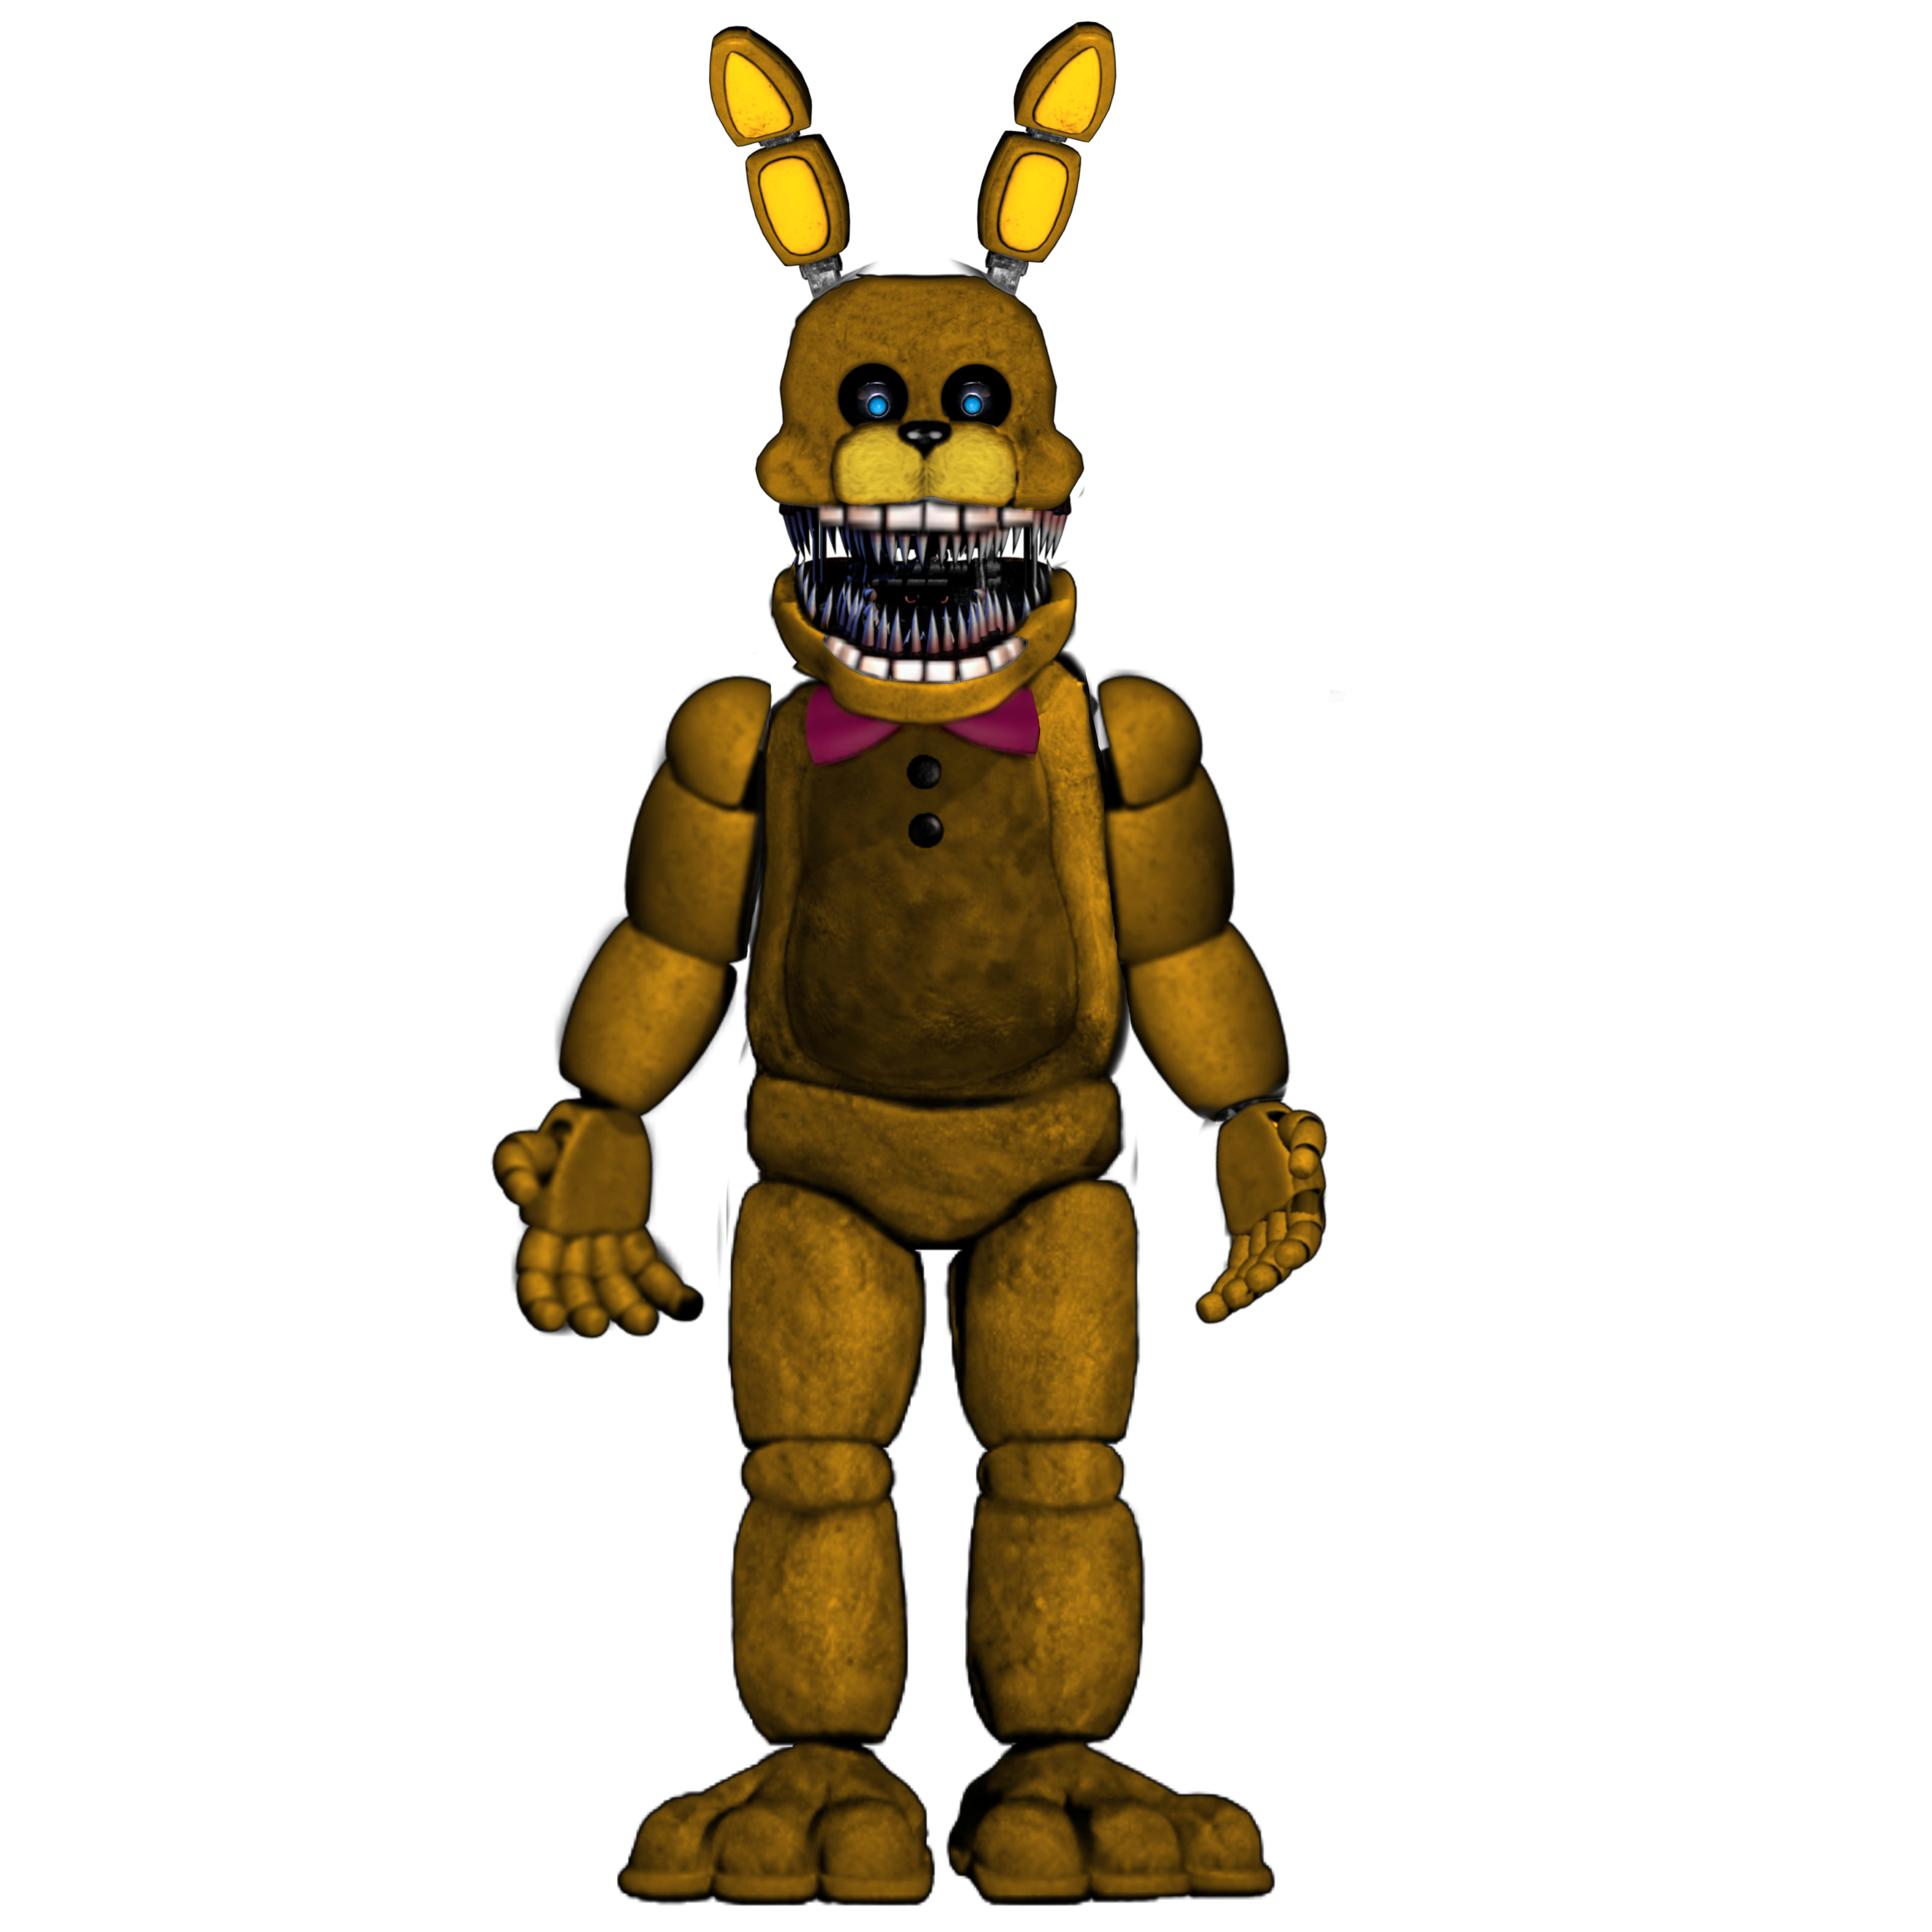 Classic Withered Foxy [FNAF Speed Edit] by Zexityreez on DeviantArt